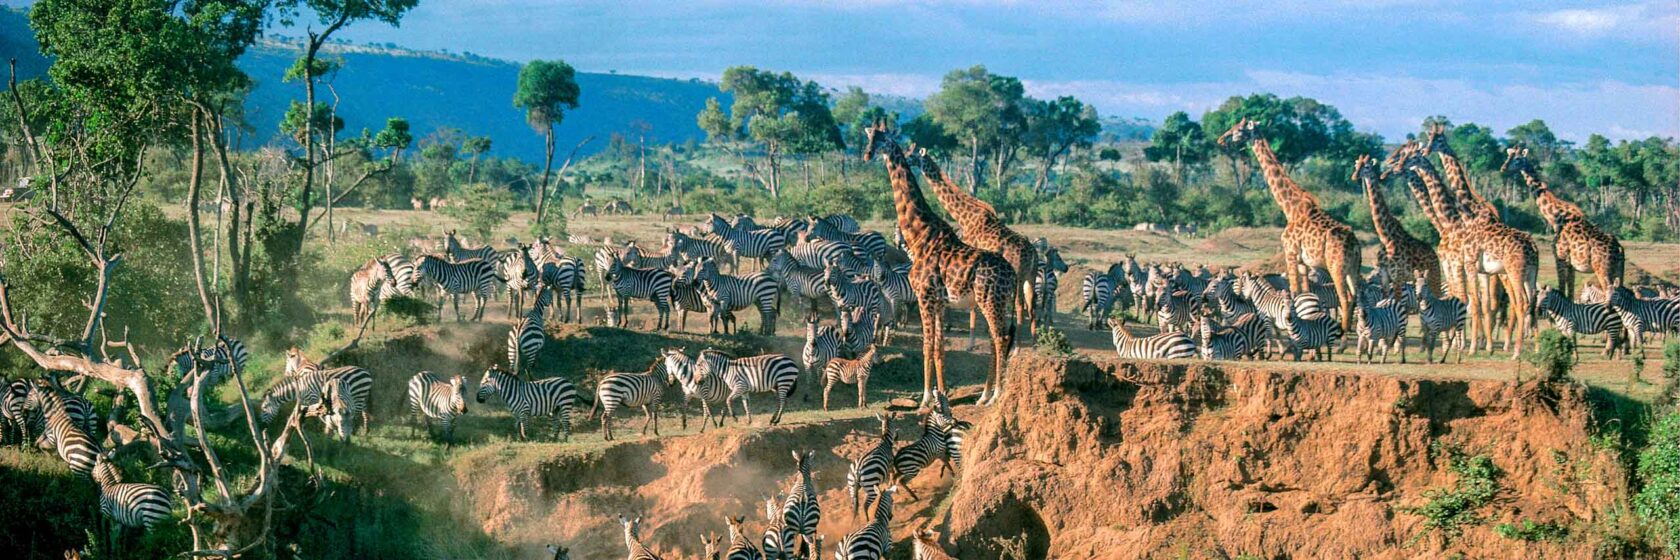 A herd of animals during the great migration.